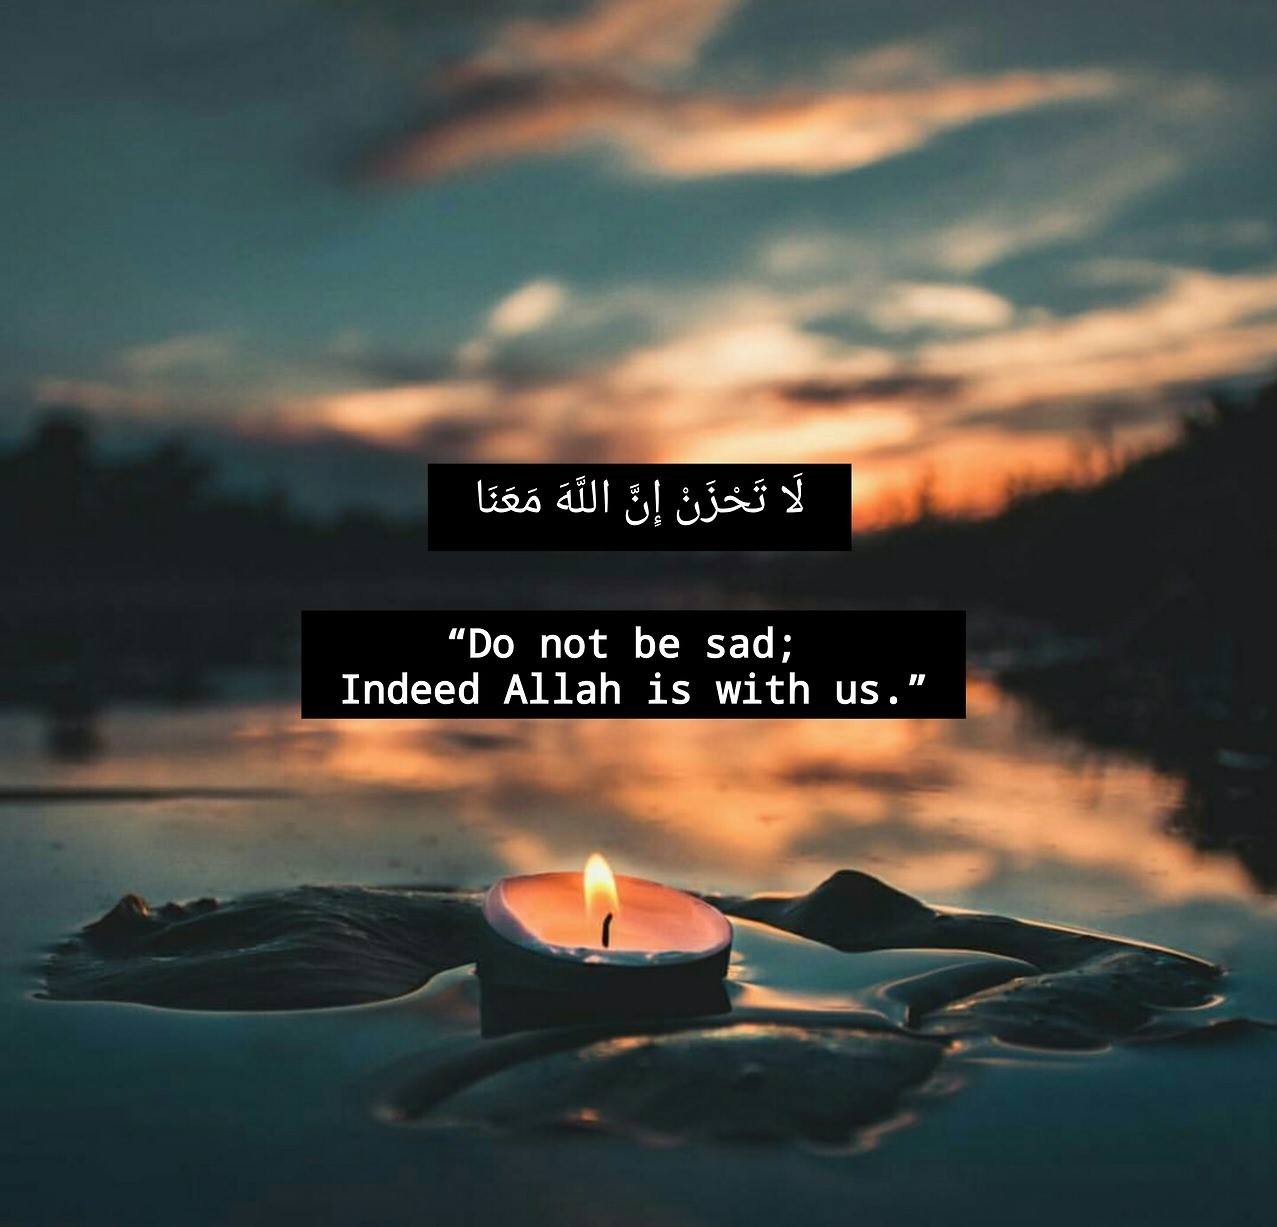 40 Islamic Quotes About Sadness How Islam Deals With Sadness Islamic whatsapp group invite link: 40 islamic quotes about sadness how